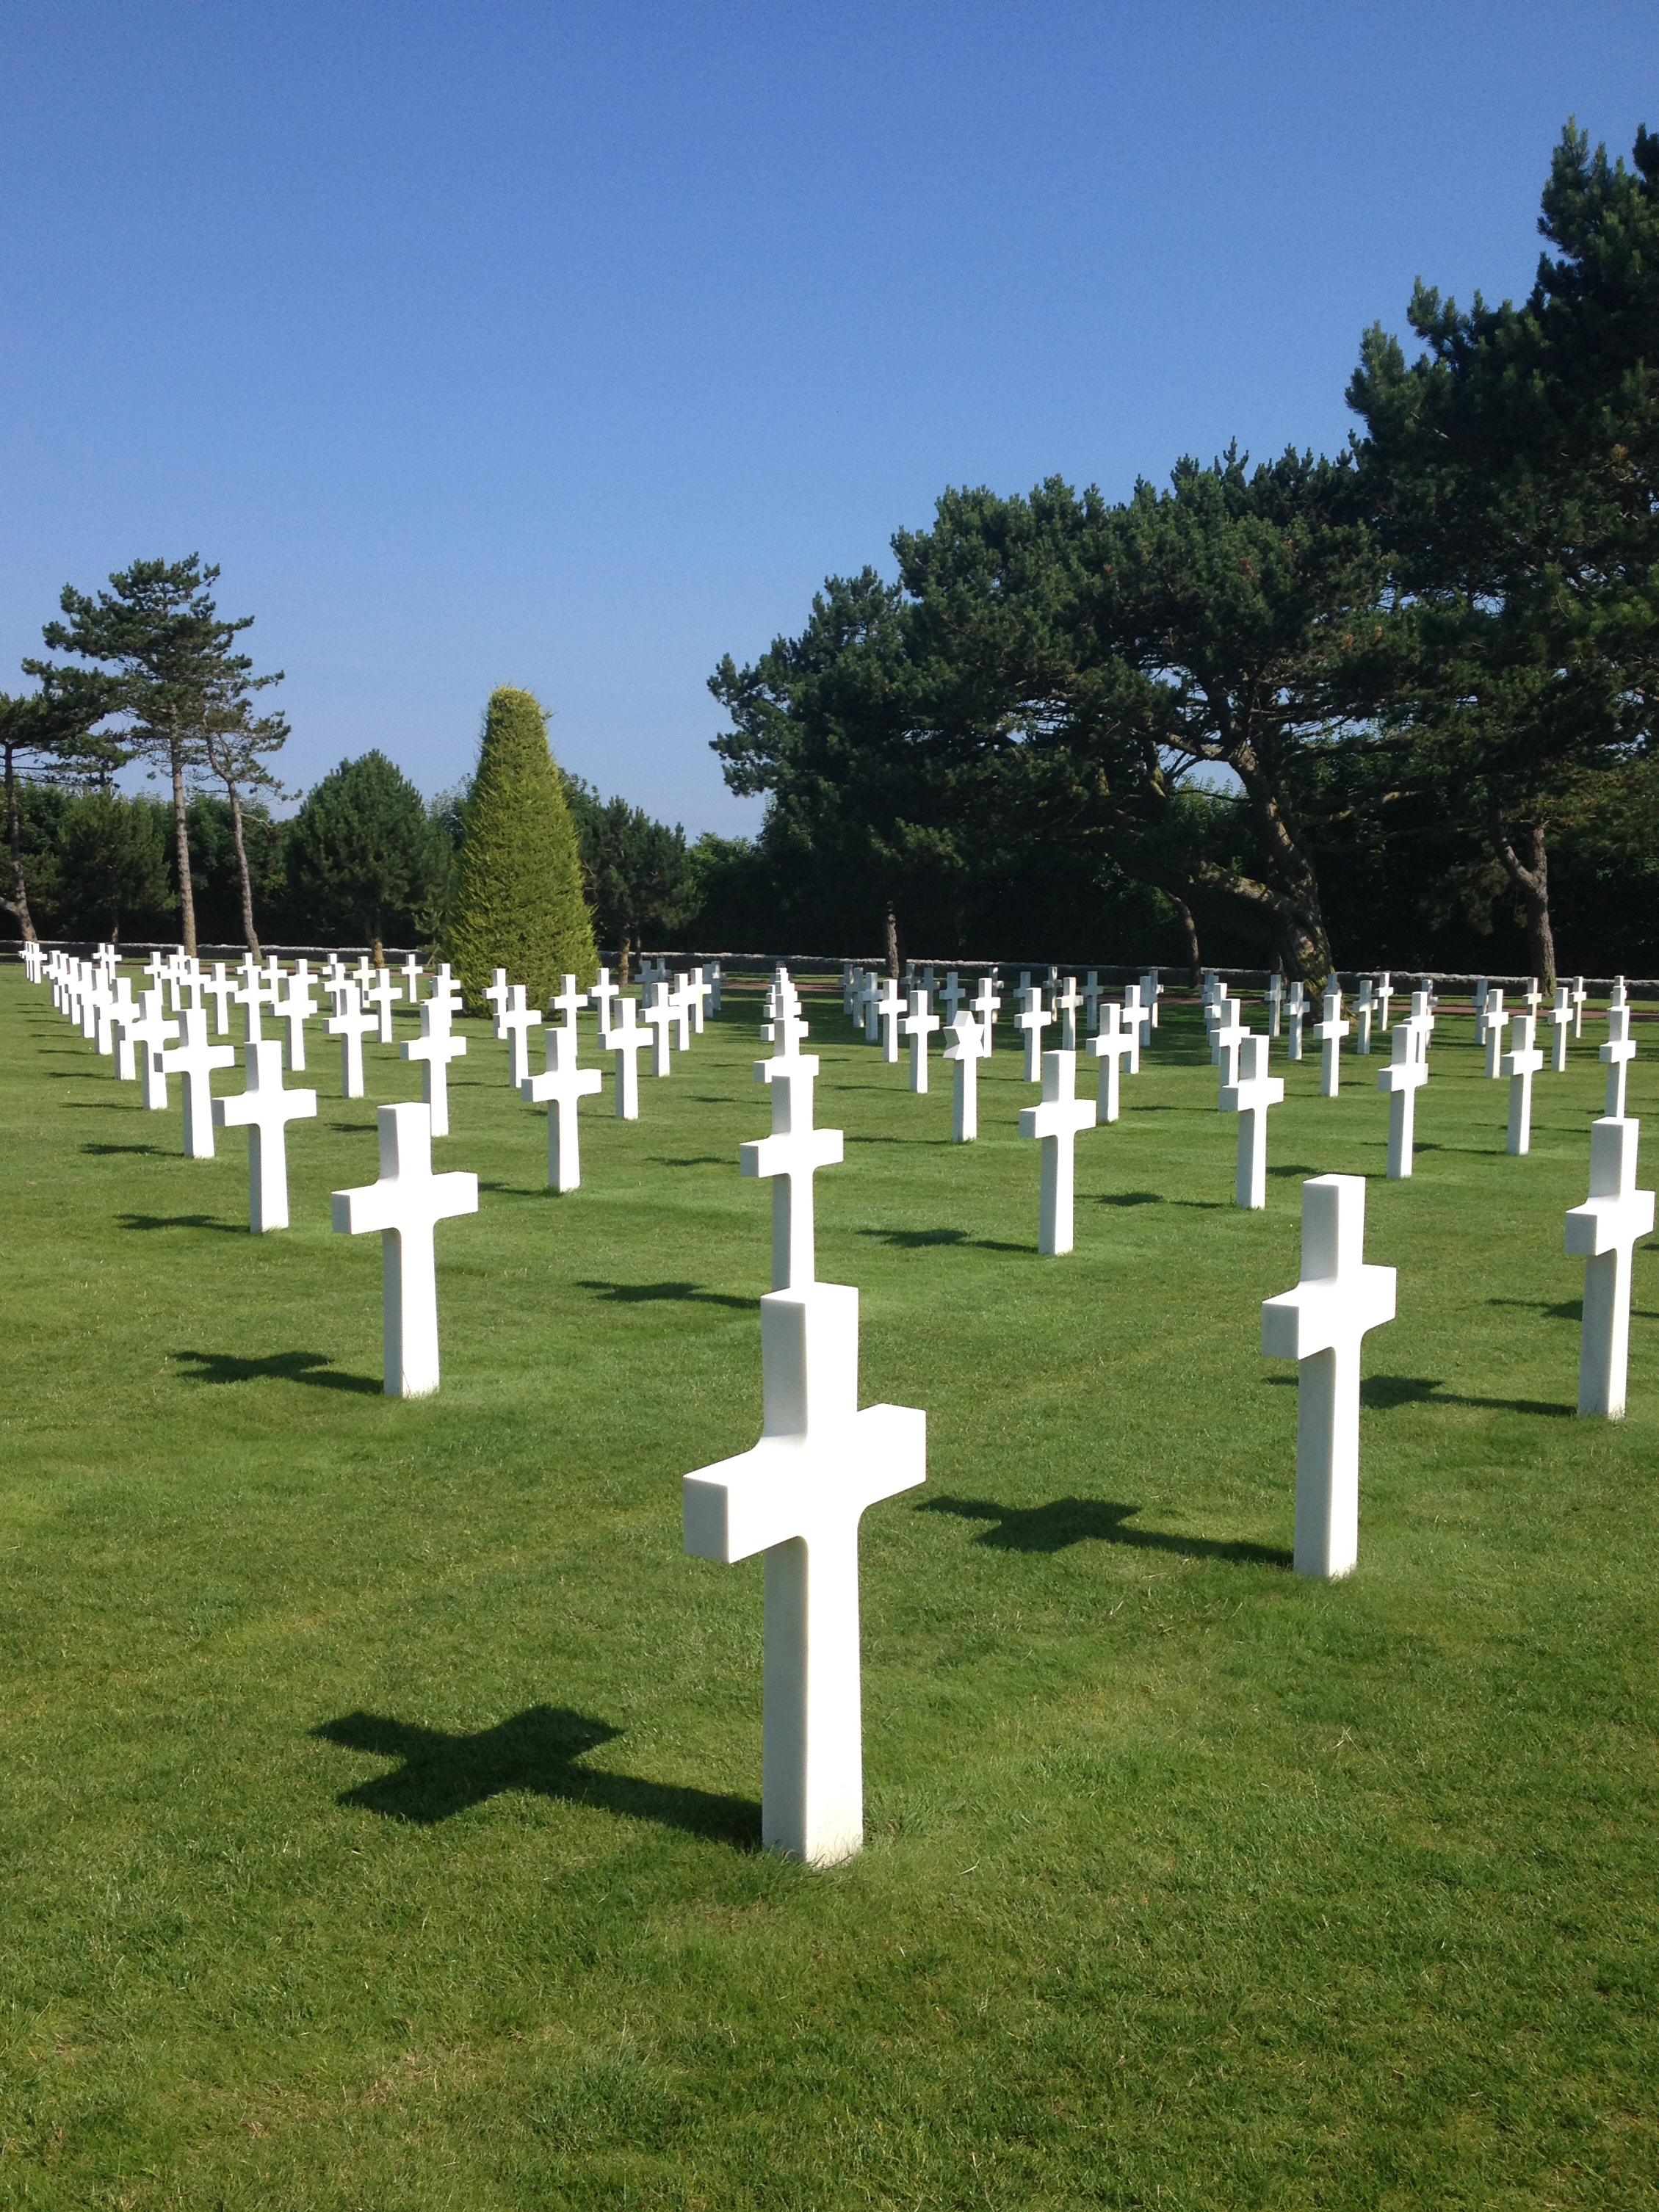  I traveled to France with my choir and we were given the honor of singing at Normandy on the Fourth of July for the 70th anniversary of D-Day. 